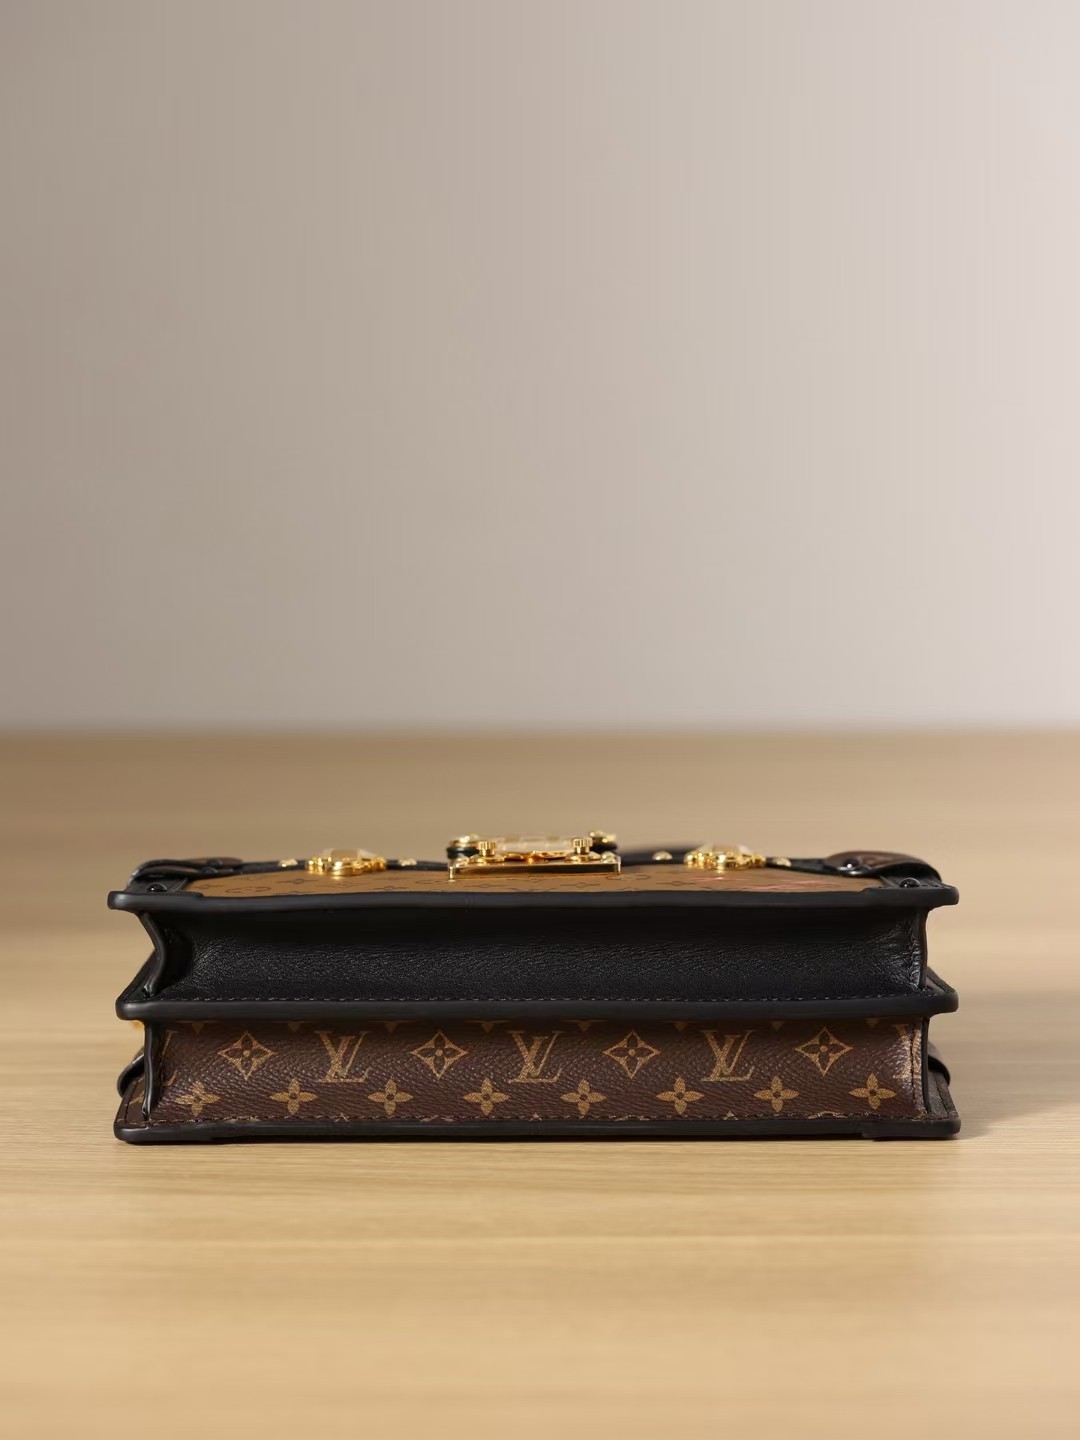 Louis Vuitton stores can not buy, why I buy top replica M43596 TRUNK CLUTCH bags? (2022 updated))-Best Quality Fake designer Bag Review, Replica designer bag ru